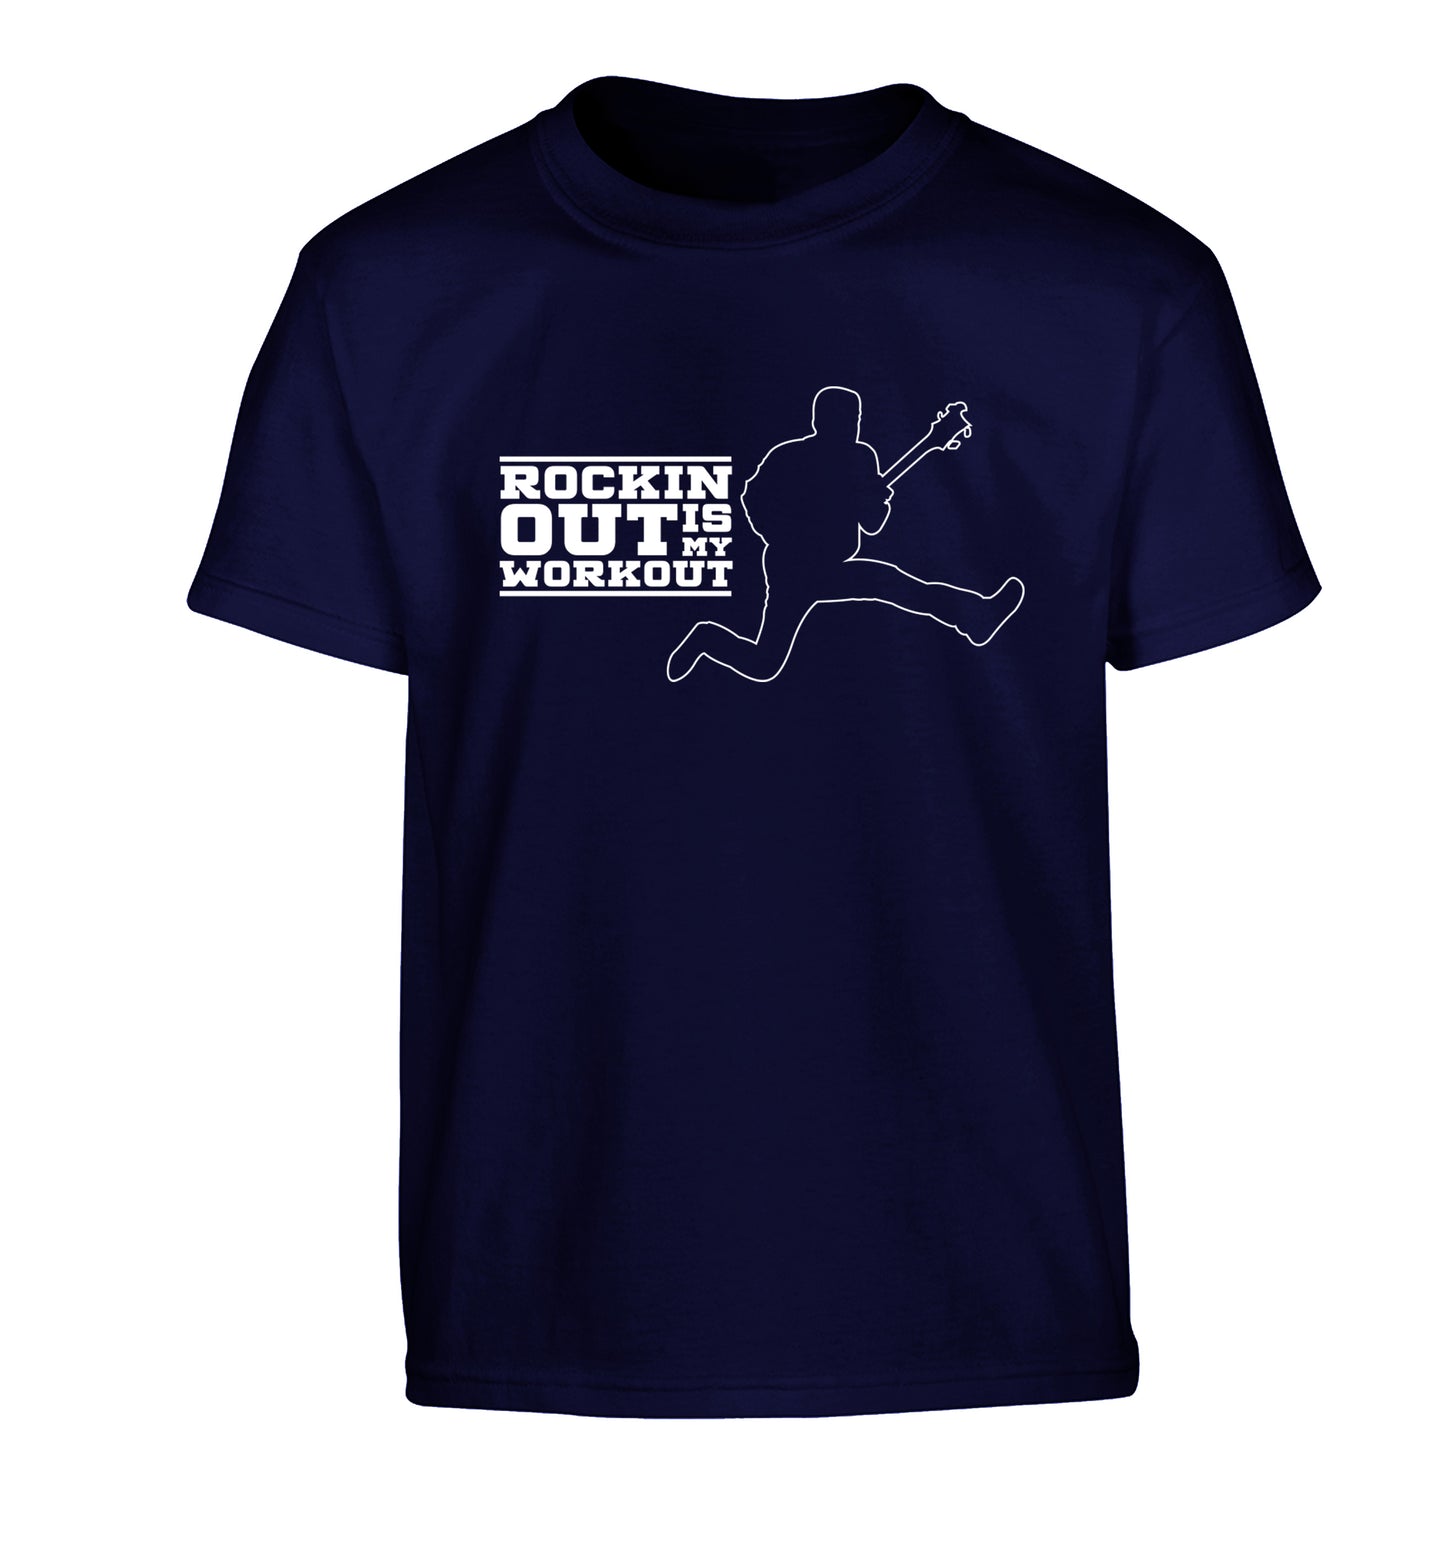 Rockin out is my workout Children's navy Tshirt 12-13 Years